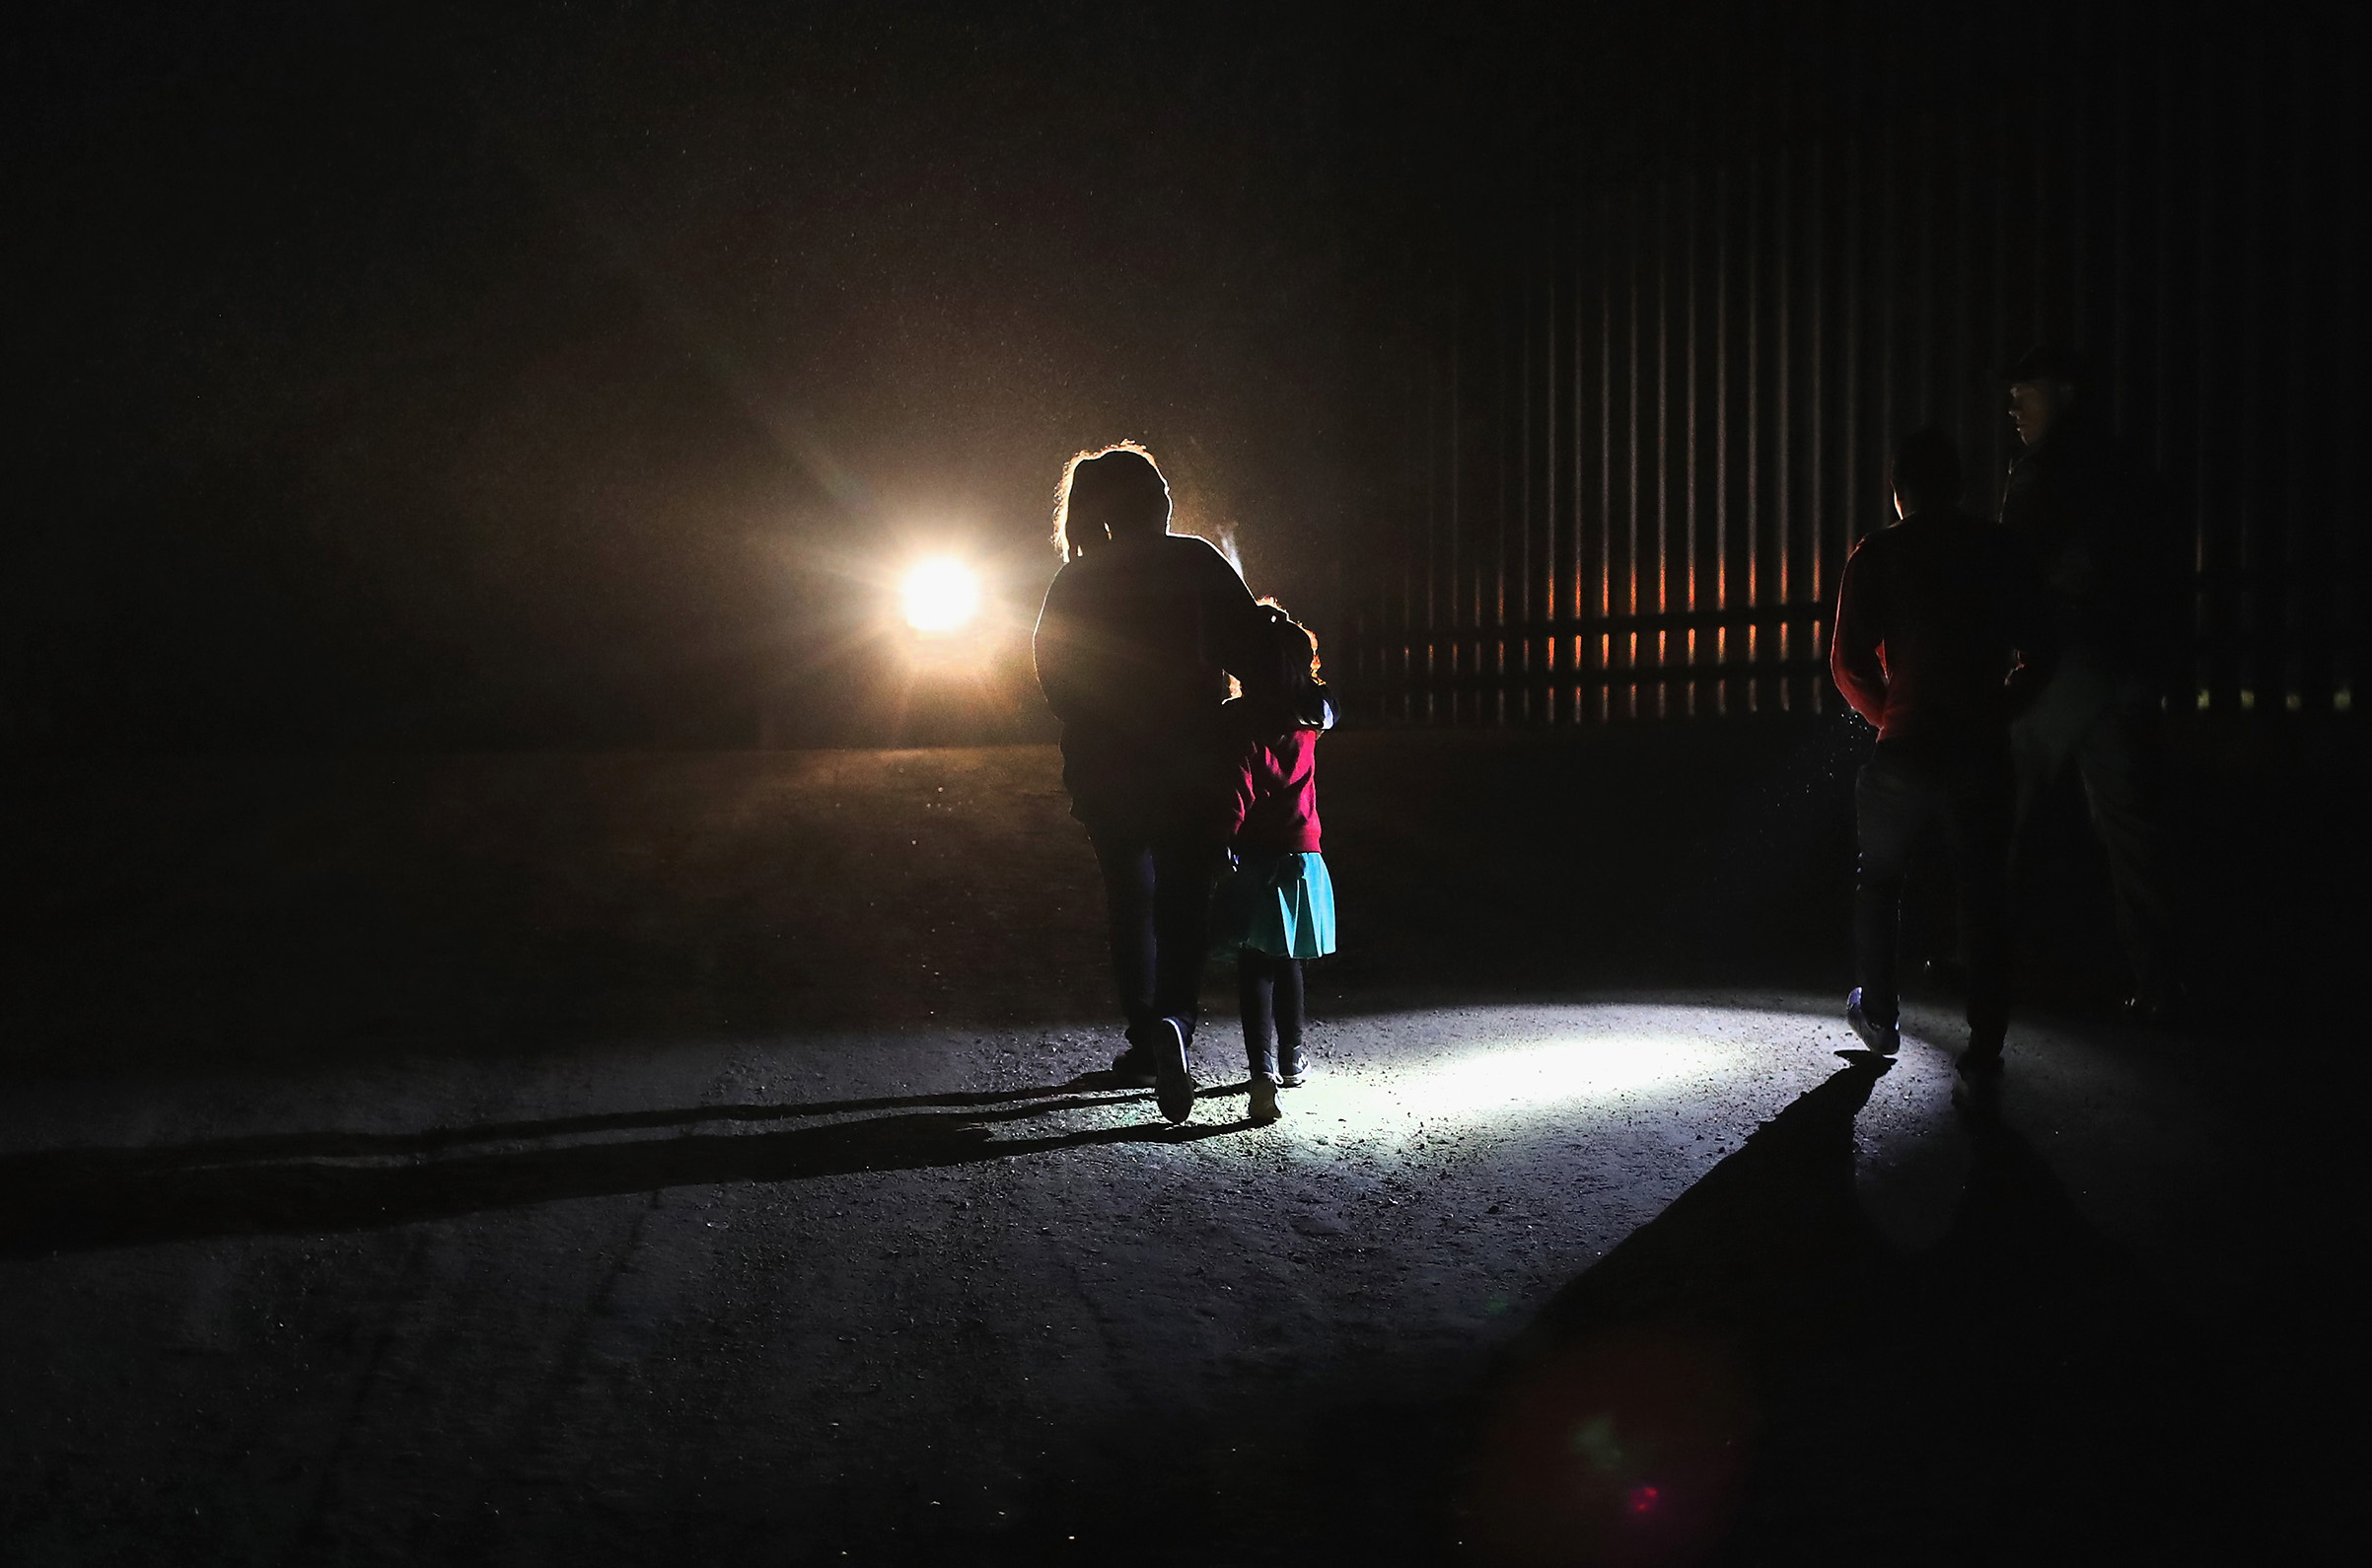 A Honduran mother walks with her children next to the U.S.-Mexico border fence as they turned themselves in to Border Patrol agents on February 22, 2018 near Penitas, Texas. Thousands of Central American families continue to enter the U.S., most seeking political asylum from violence in their home countries. The Rio Grande Valley has the highest number of undocumented immigrant crossings and narcotics smuggling of the entire U.S.-Mexico border. (John Moore—Getty Images)